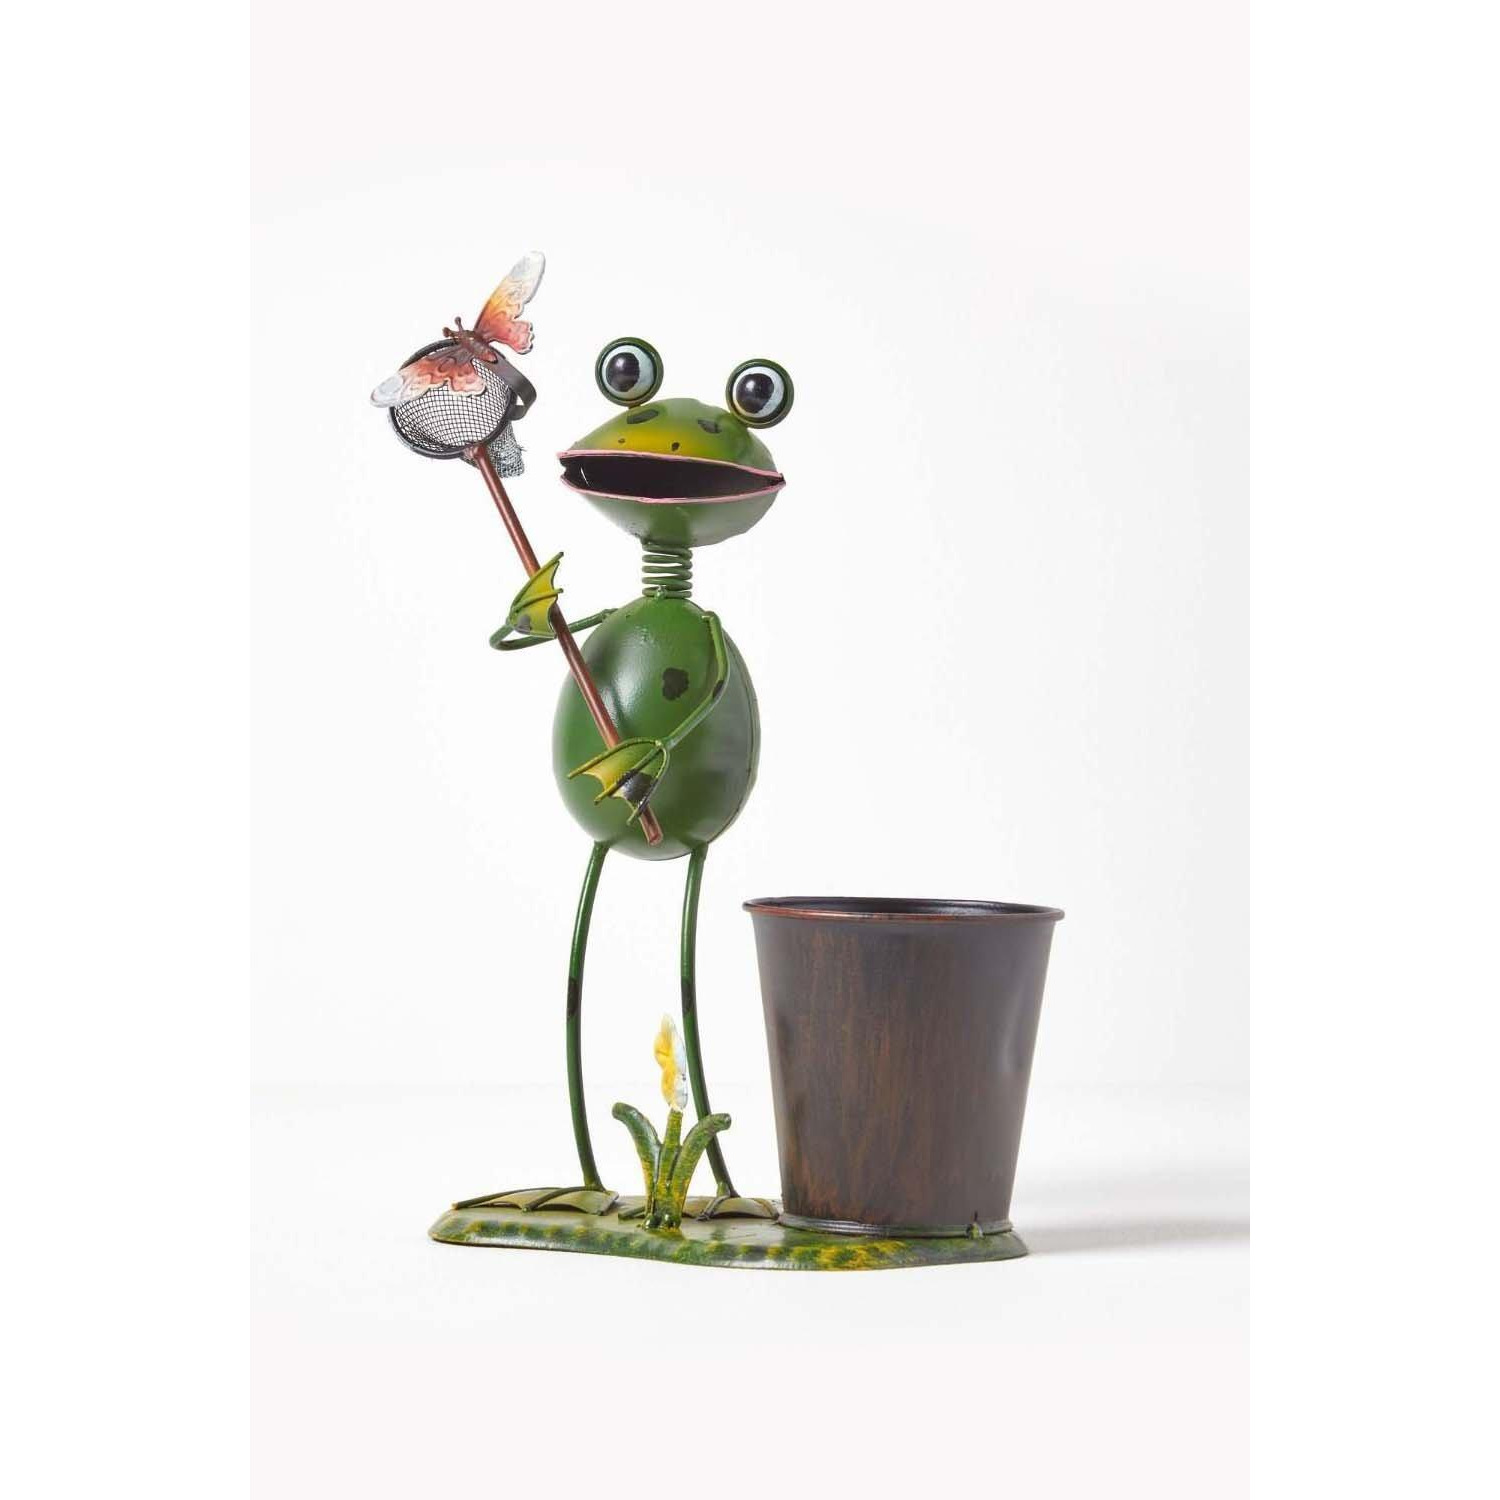 Metal Frog with Butterfly Net and Flower Pot, 31 cm Tall - image 1